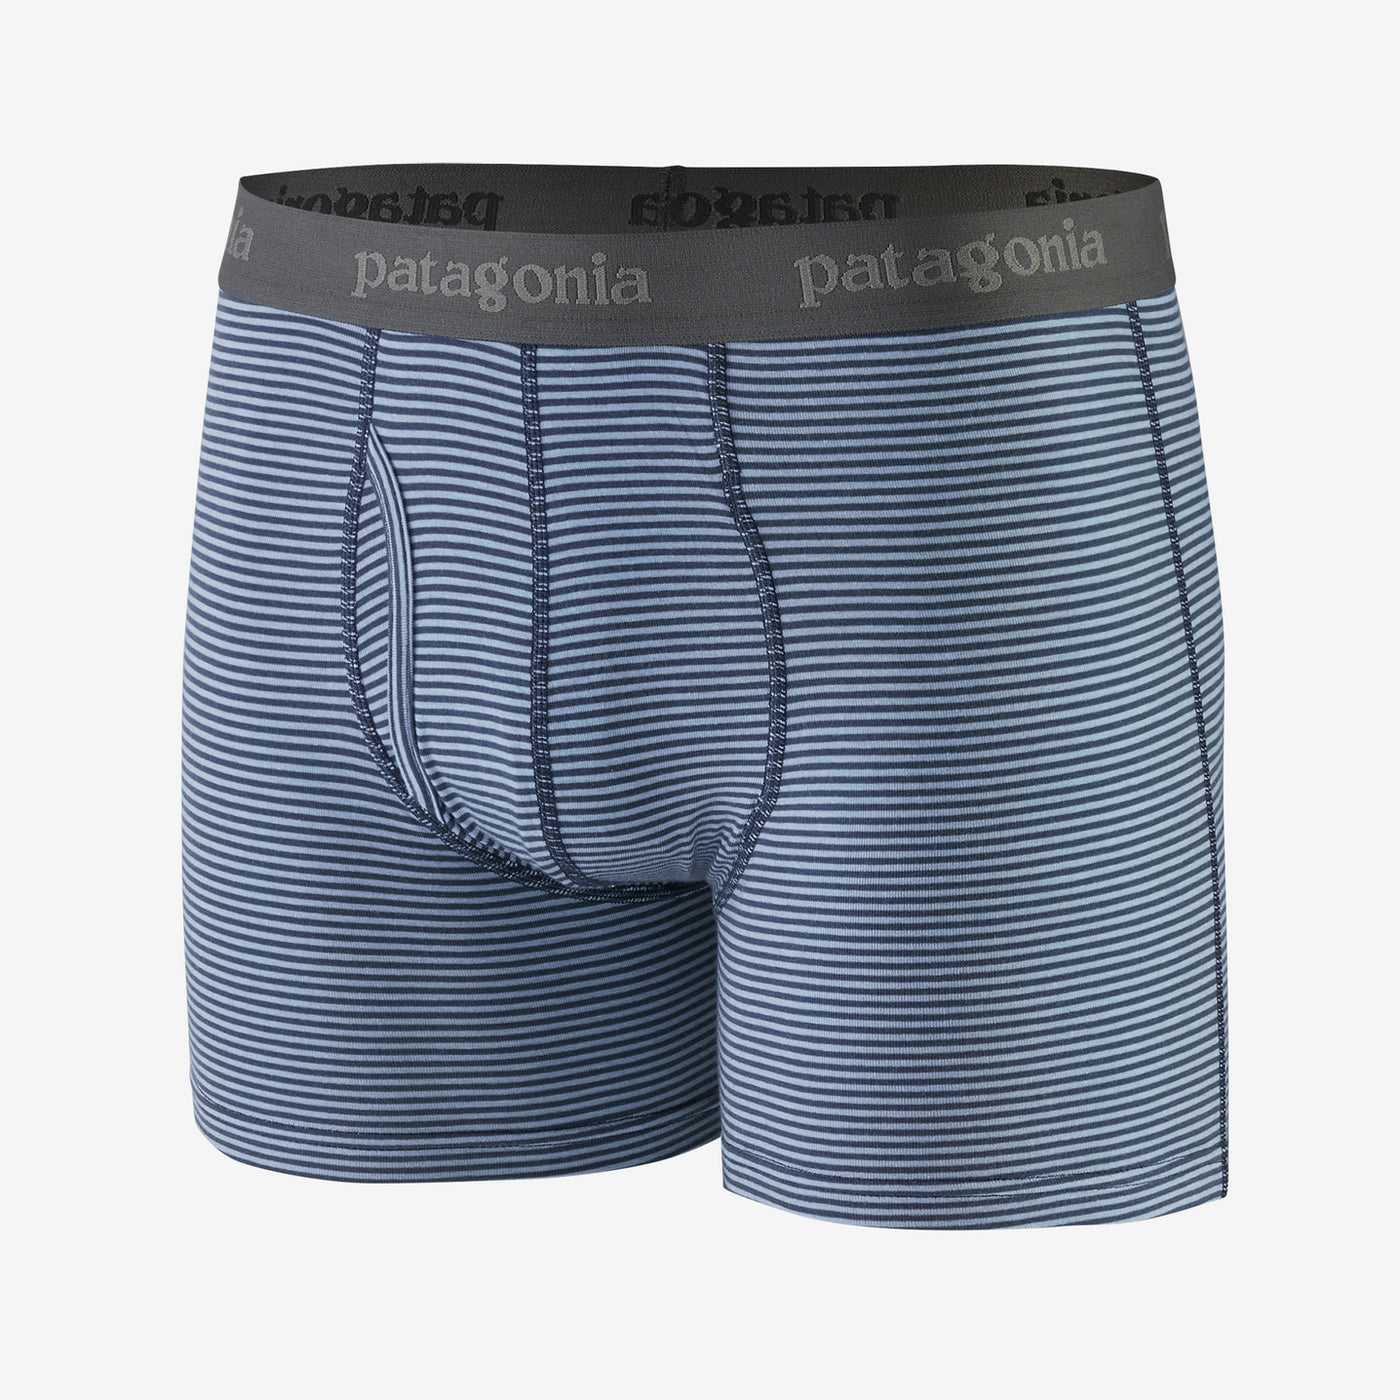 Patagonia Men's Essential Boxer Briefs - 3"-MENS CLOTHING-Fathom Stripe New Navy-S-Kevin's Fine Outdoor Gear & Apparel